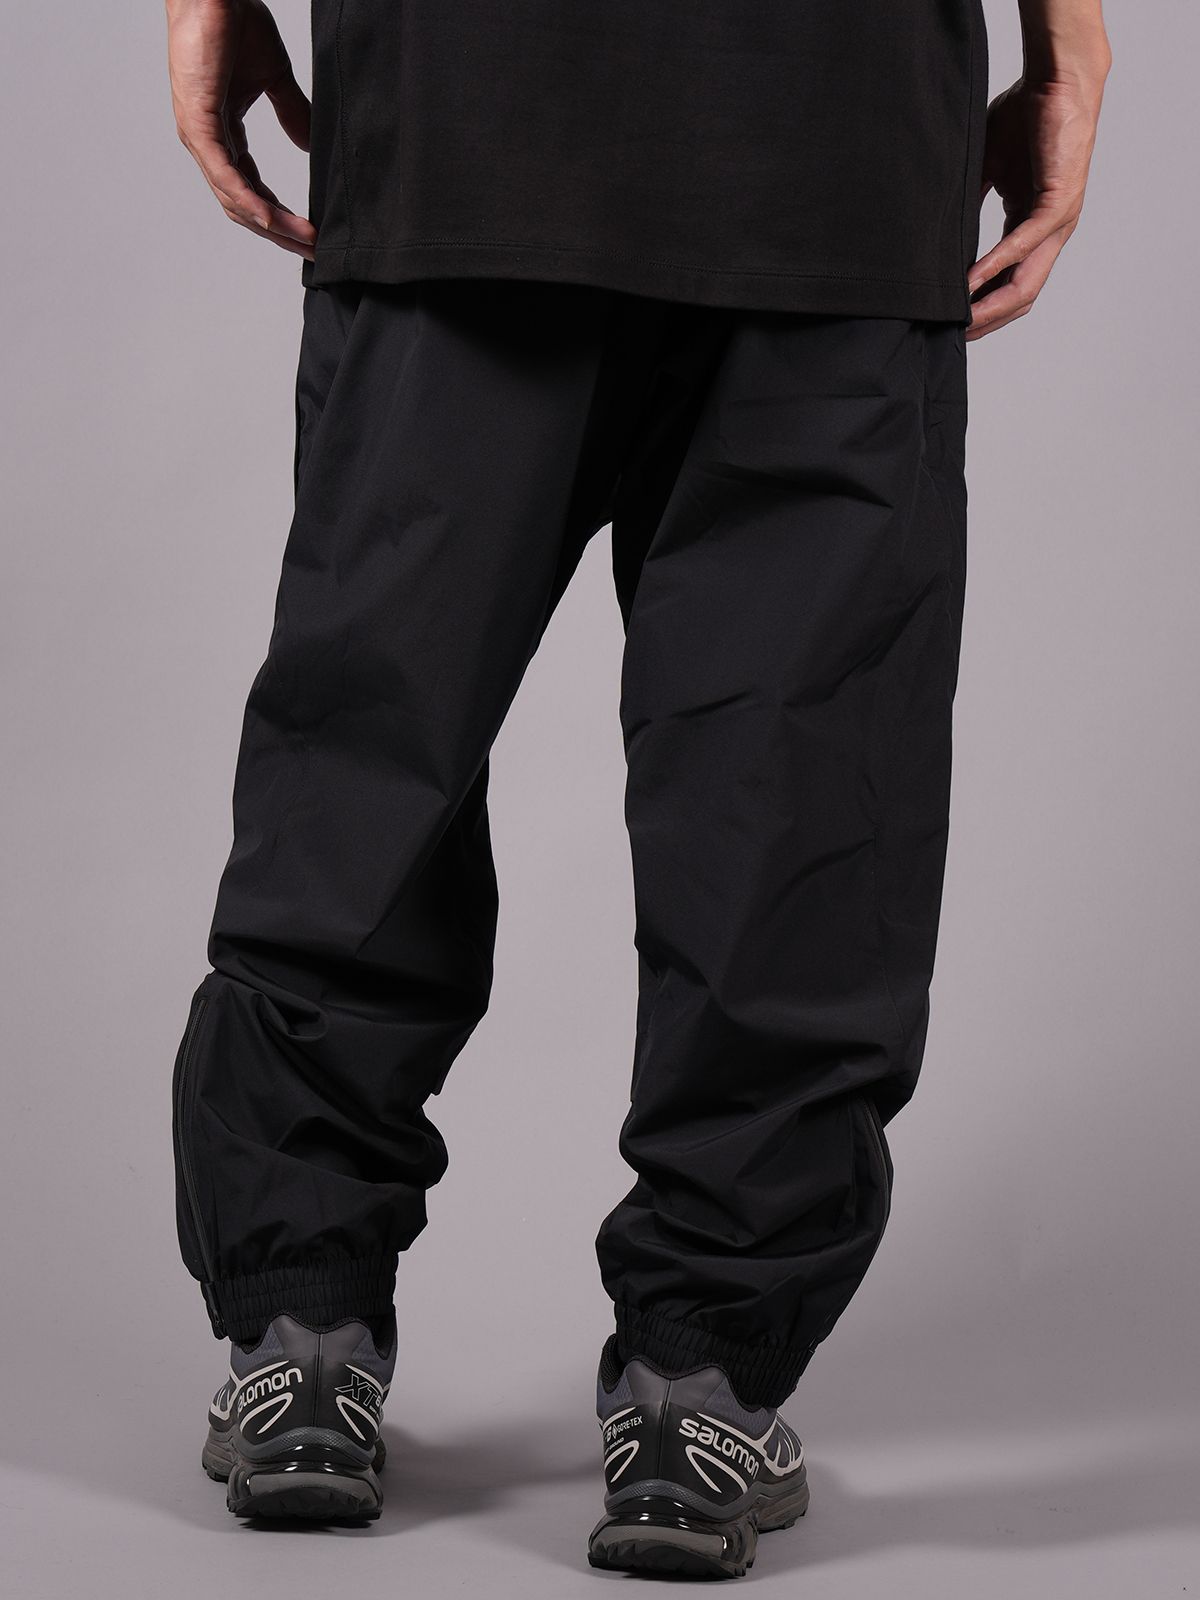 ACRONYM - P53-WS / 2L Gore-Tex® Windstopper® Insulated Vent Pants